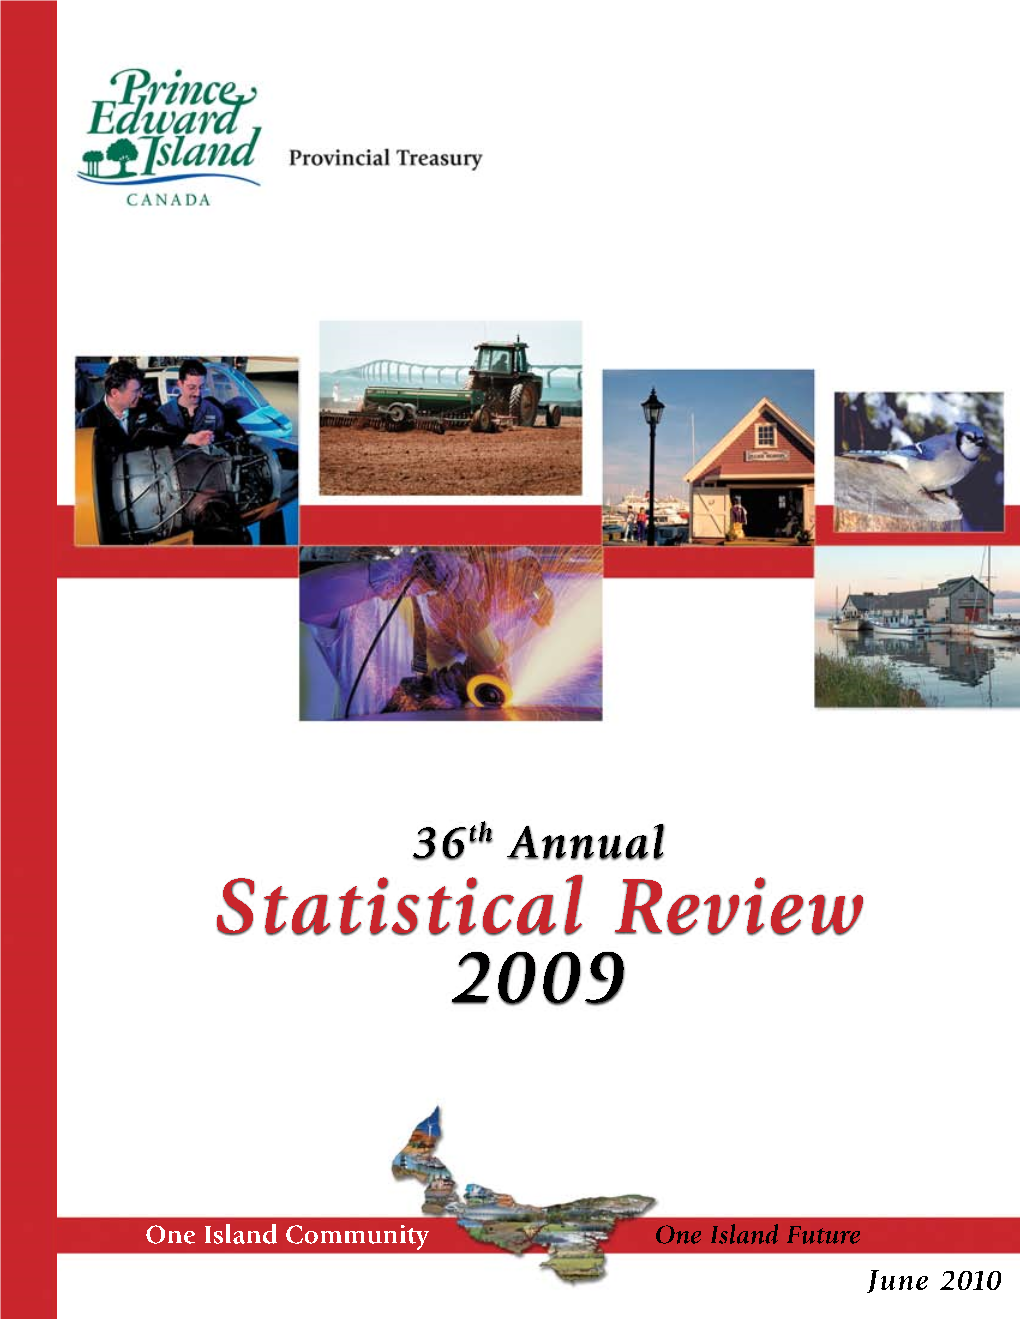 Annual Statistical Review 2009